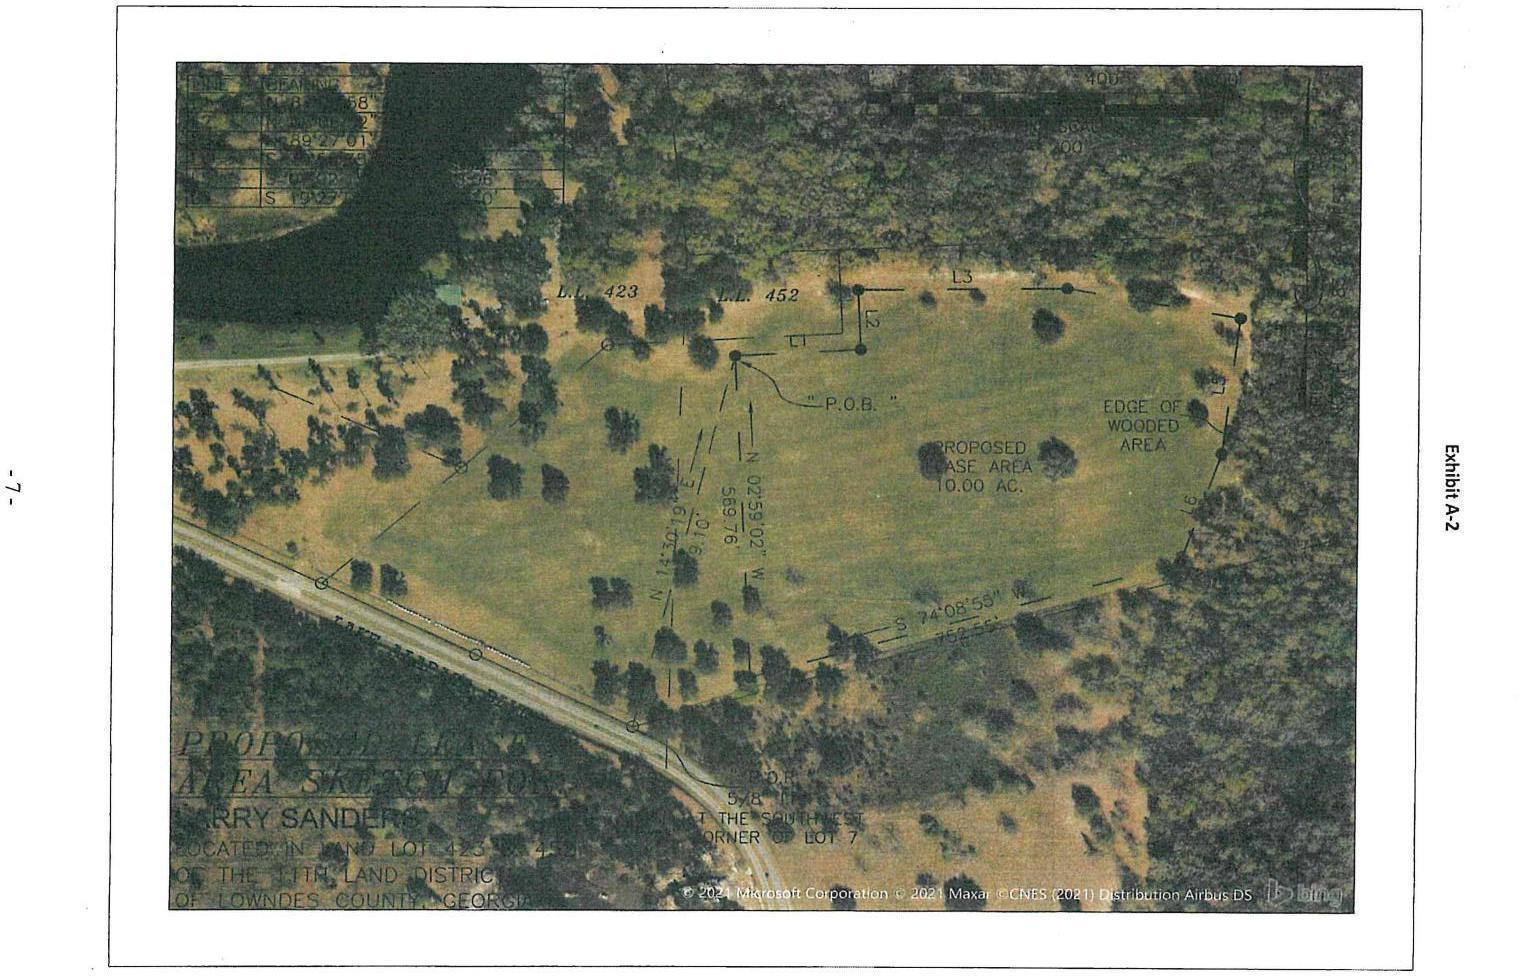 Exhibit A-2: aerial map with site plan